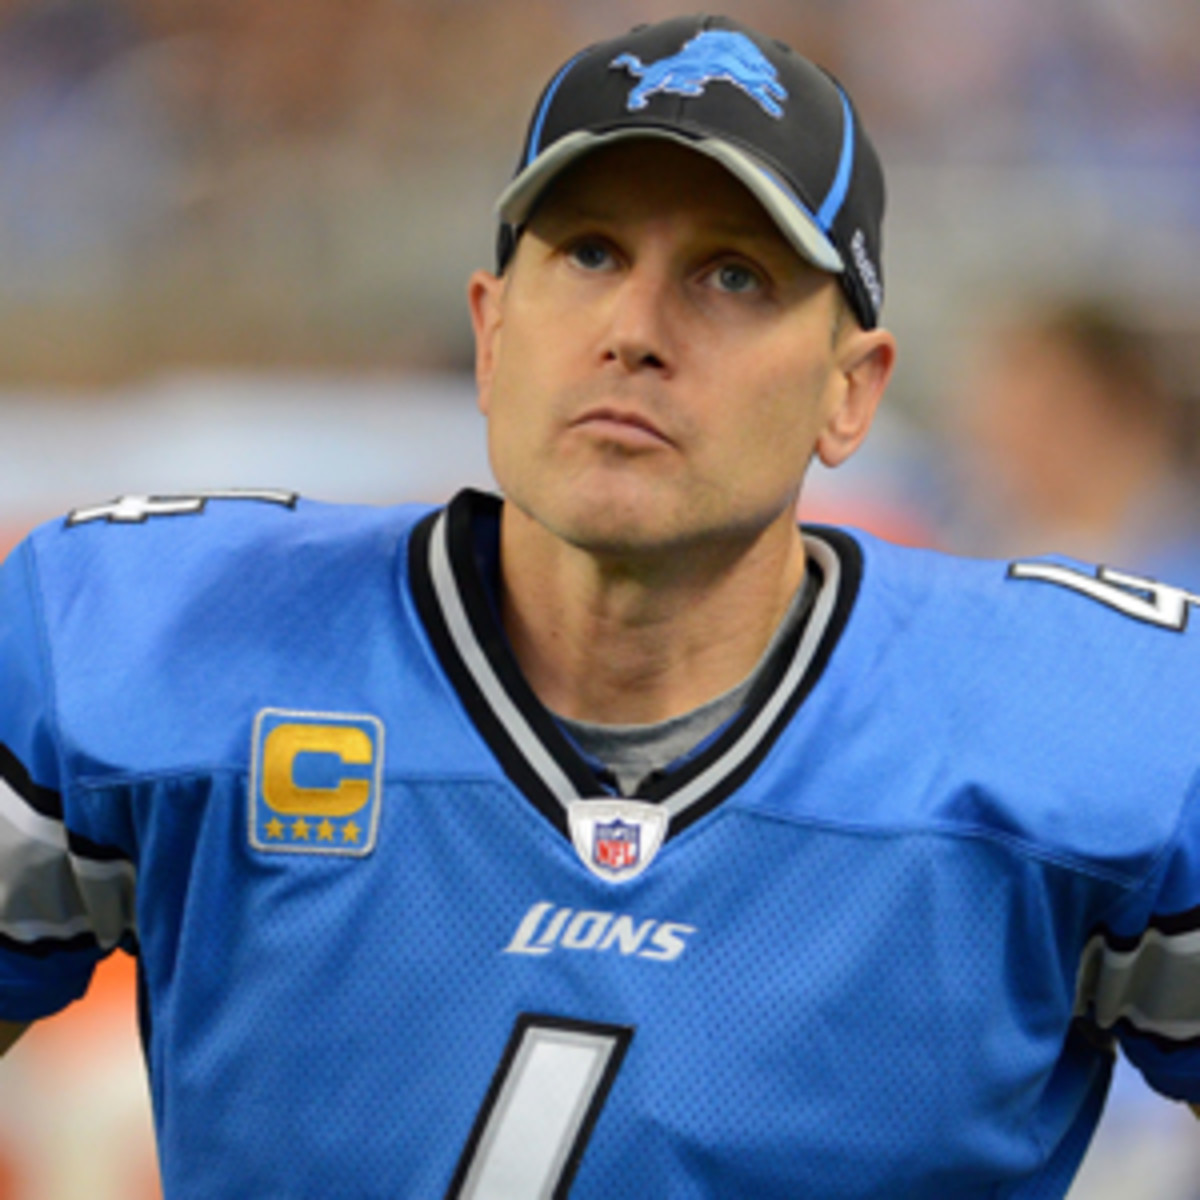 Jason Hanson was the NFL's longest-tenured player before retiring after 21 seasons. (Mark Cunningham/Getty Images)